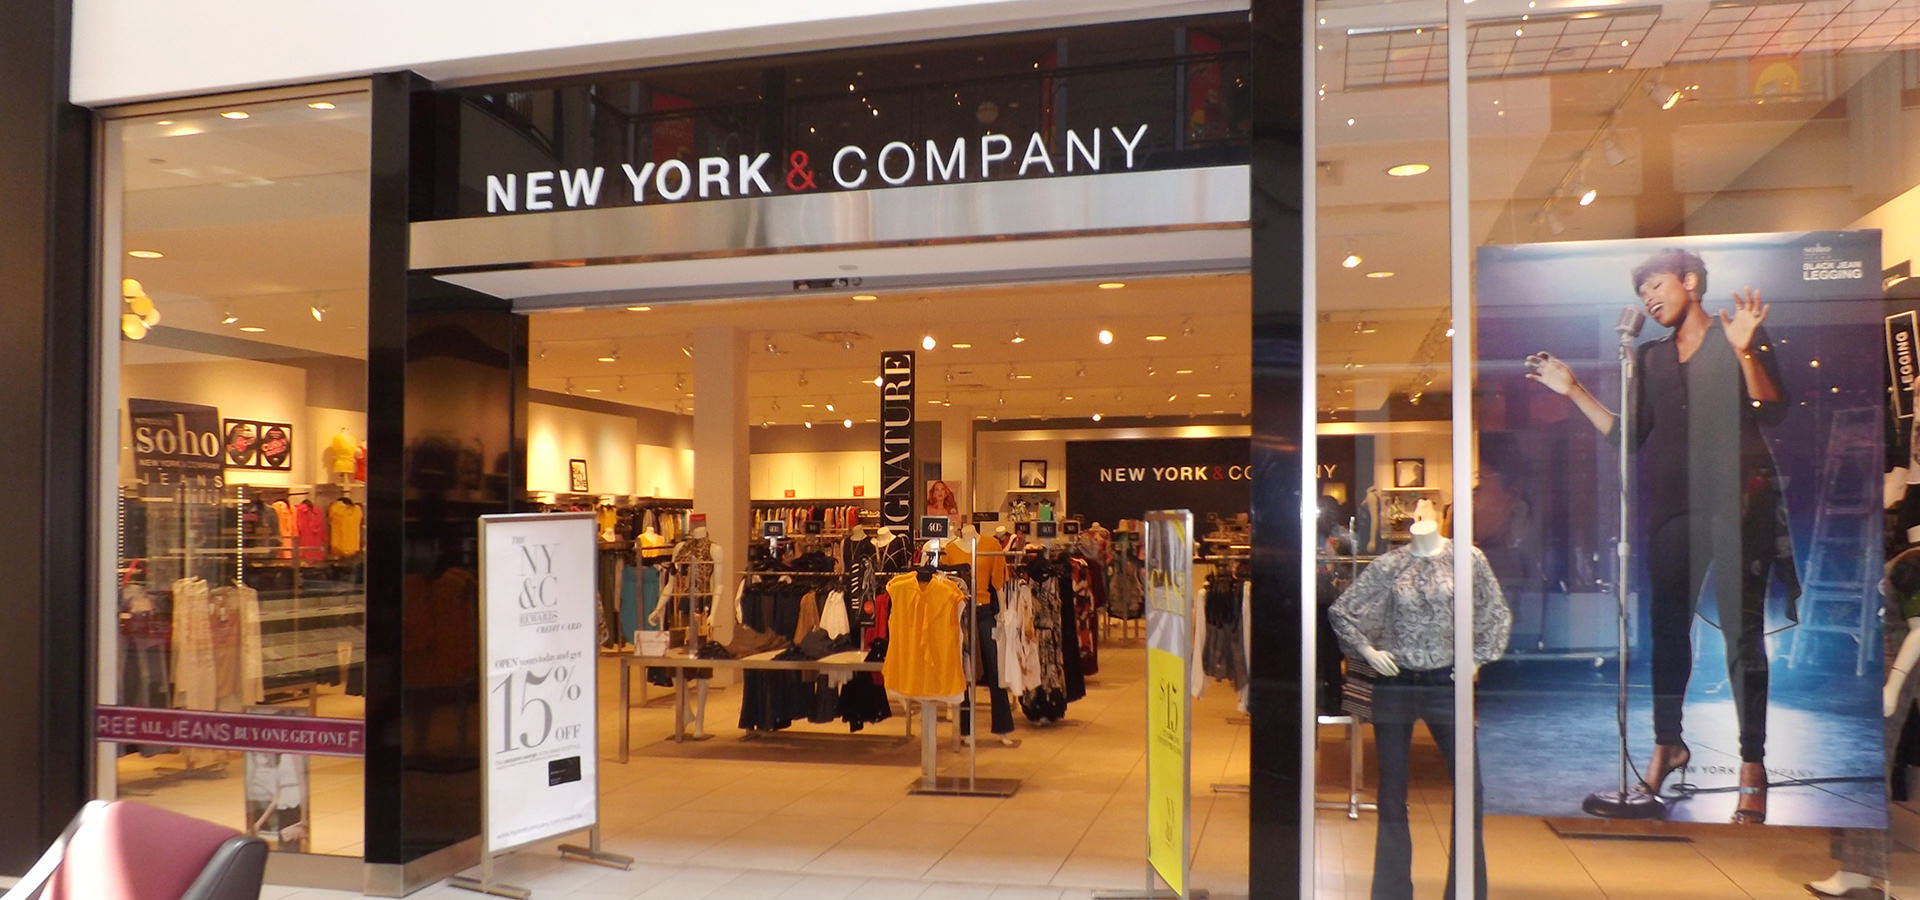 How To Check Your New York & Company Gift Card Balance